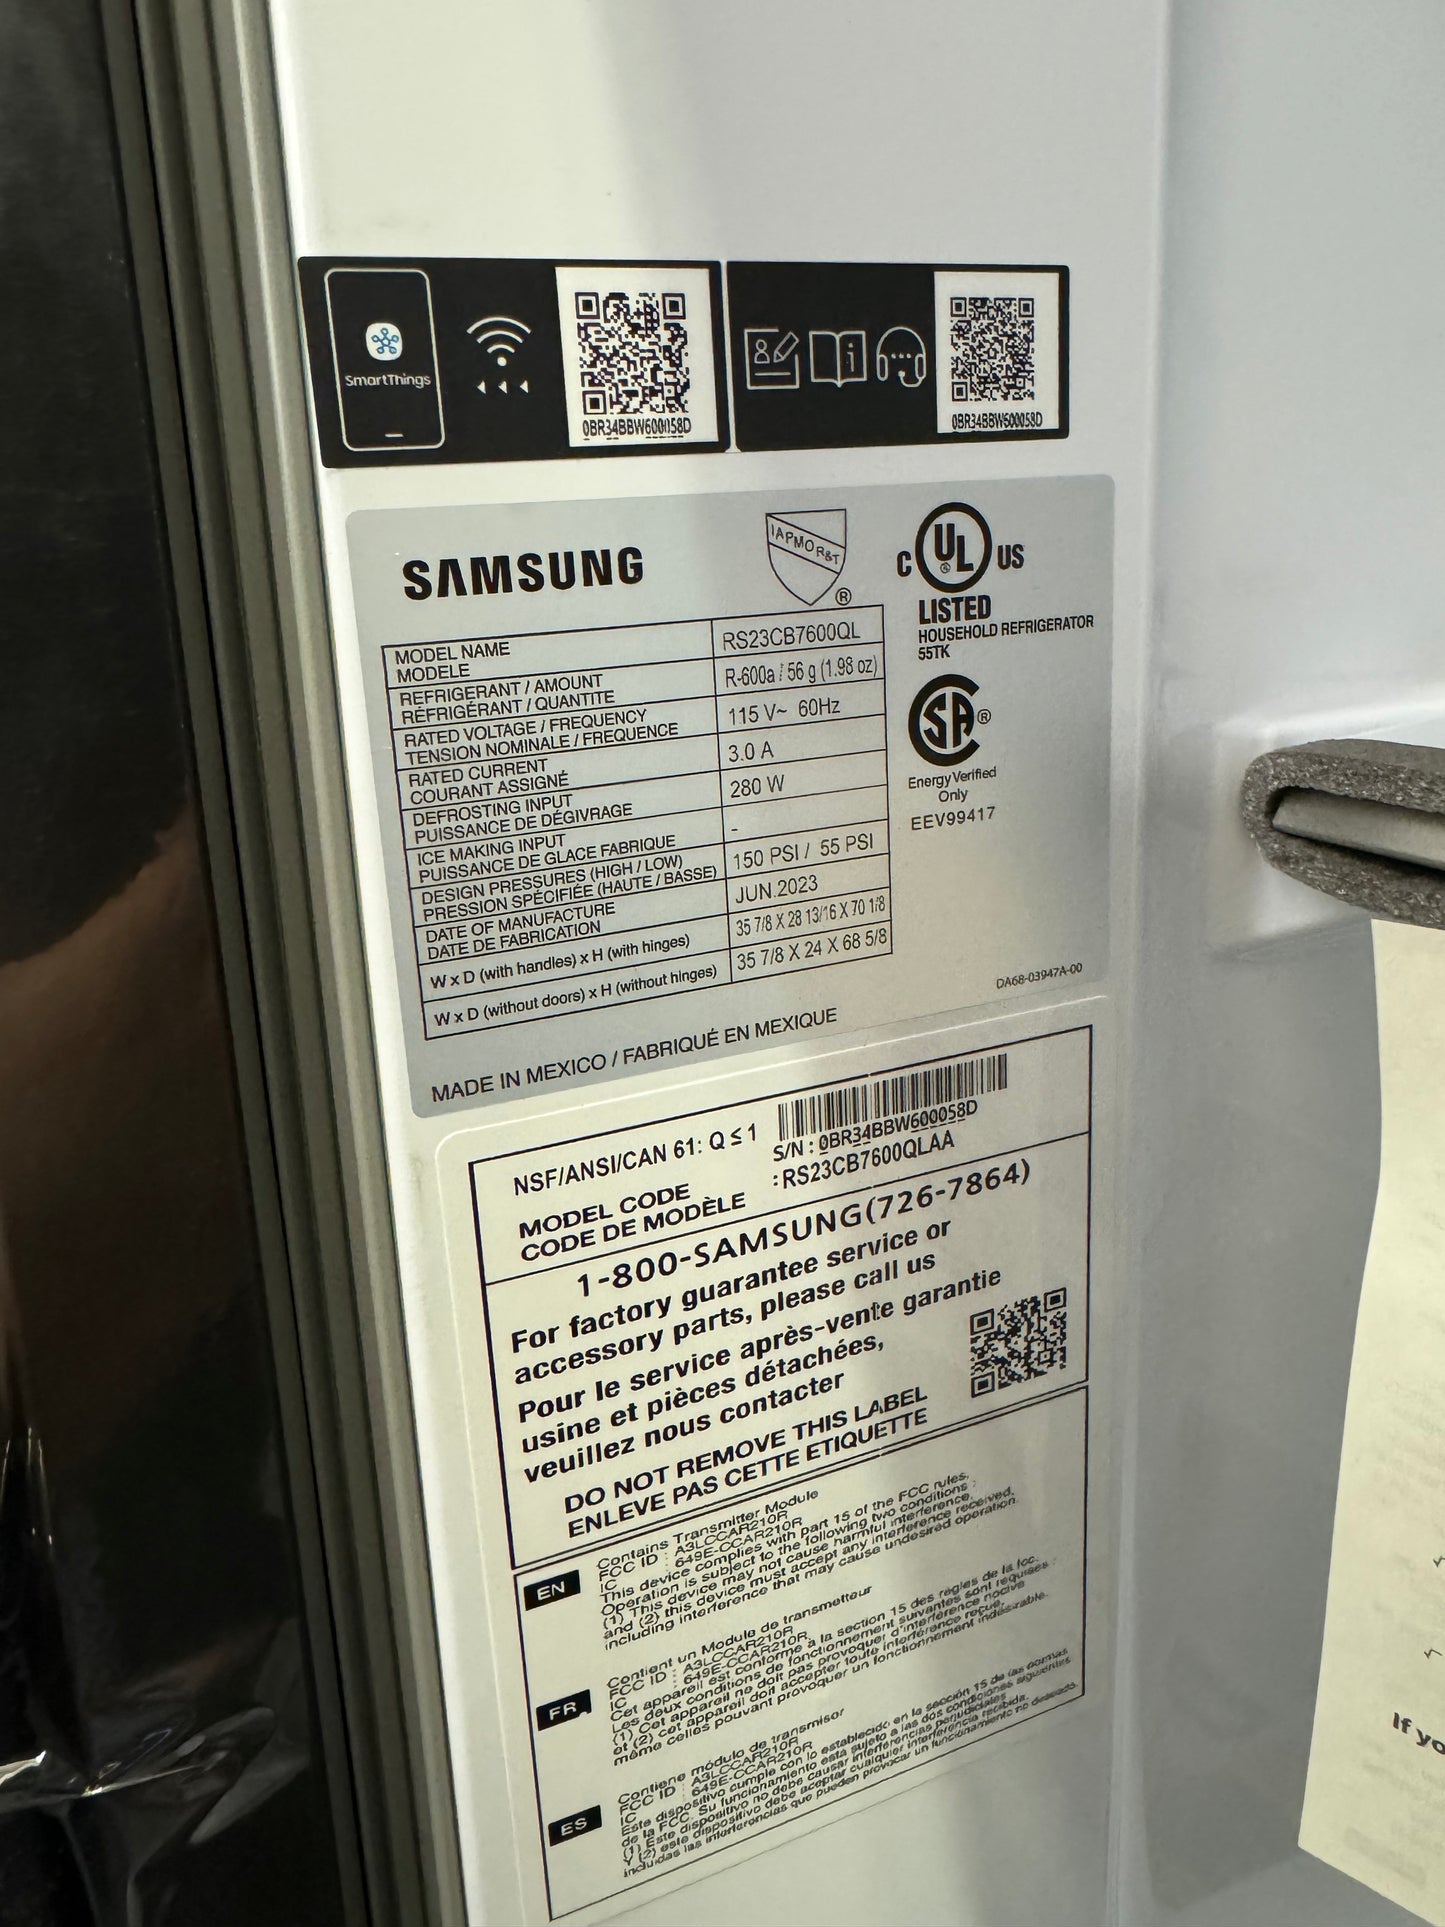 Samsung Bespoke Counter Depth Side-by-Side 23 cu. ft. Refrigerator with Beverage Center™ in Stainless Steel